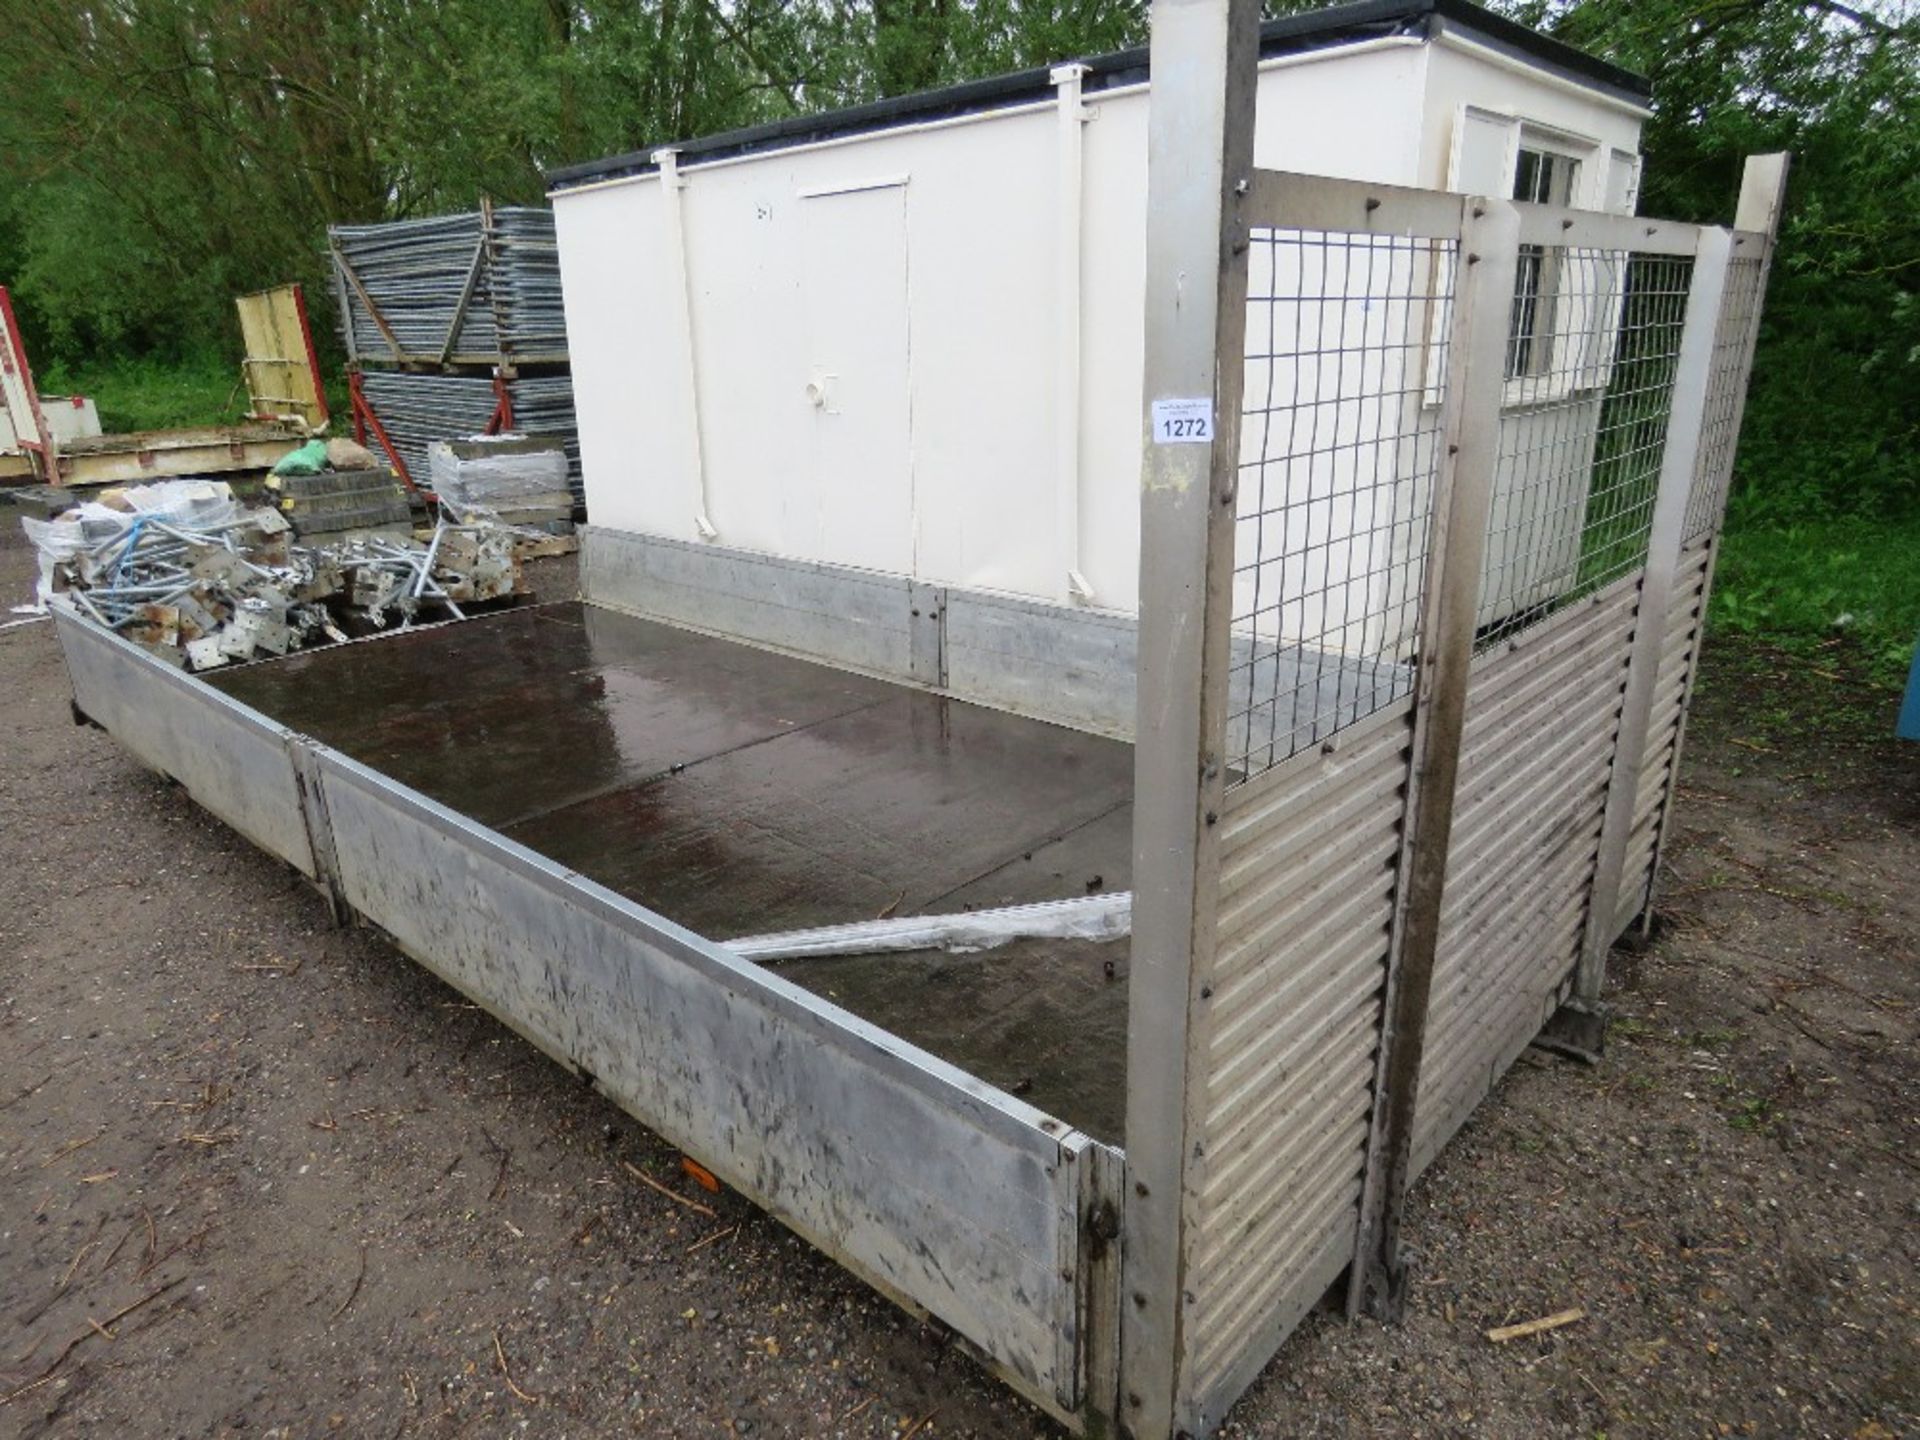 ALUMINIUM DROP SIDE LORRY BODY, 4.95M LENGTH X 2.11M WIDTH APPROX, NO TAILBOARD. THIS LOT IS SOL